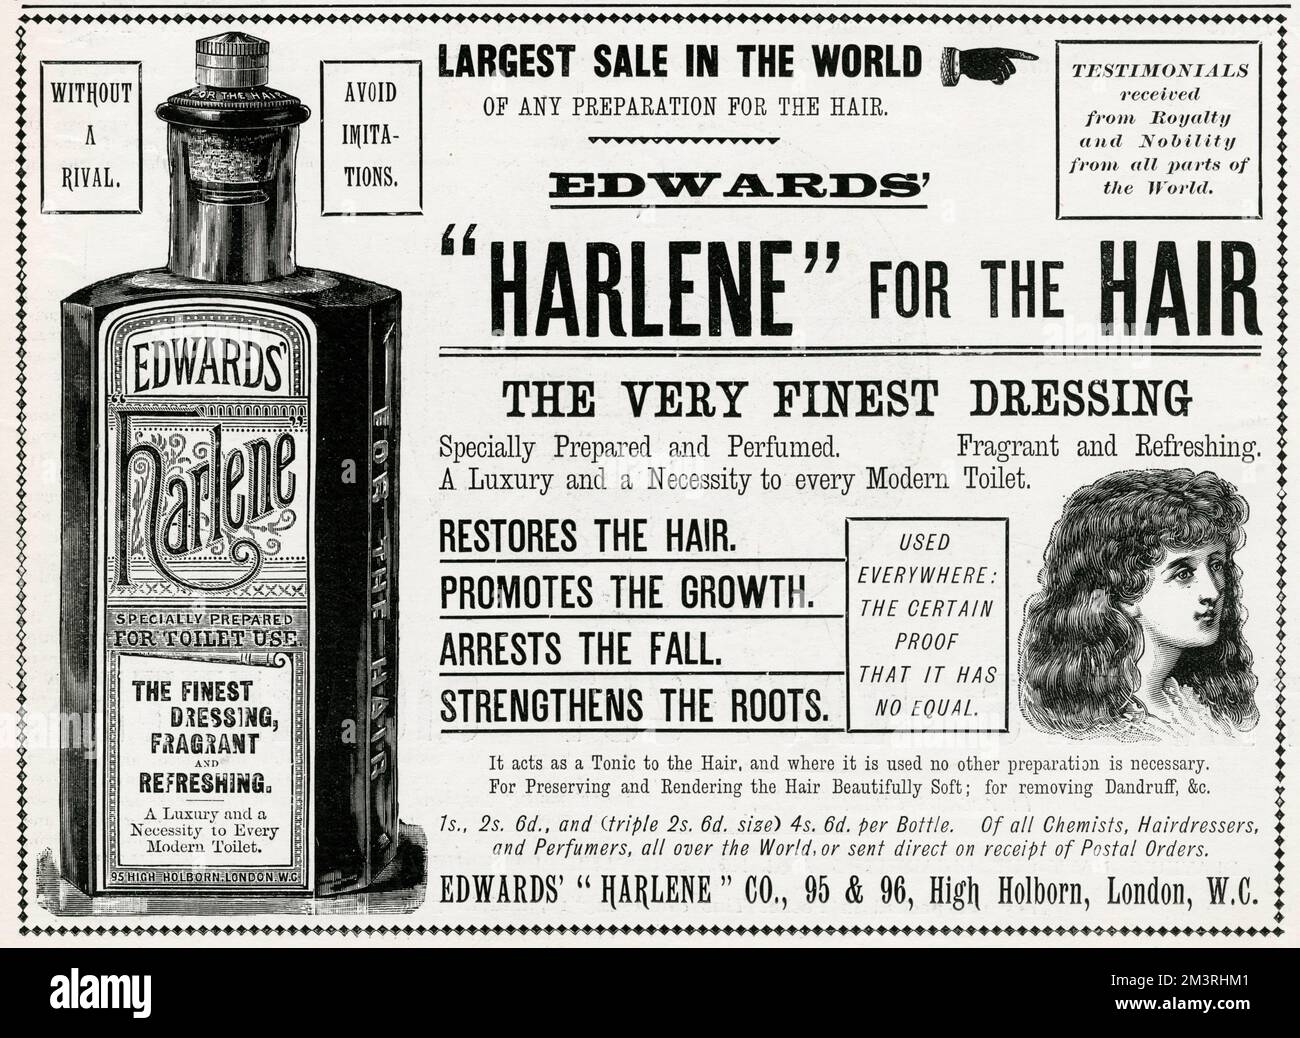 Luxury 'Harlene' hair tonic, restores the hair promotes the growth, arrests the fall, strengthens the roots.  1896 Stock Photo